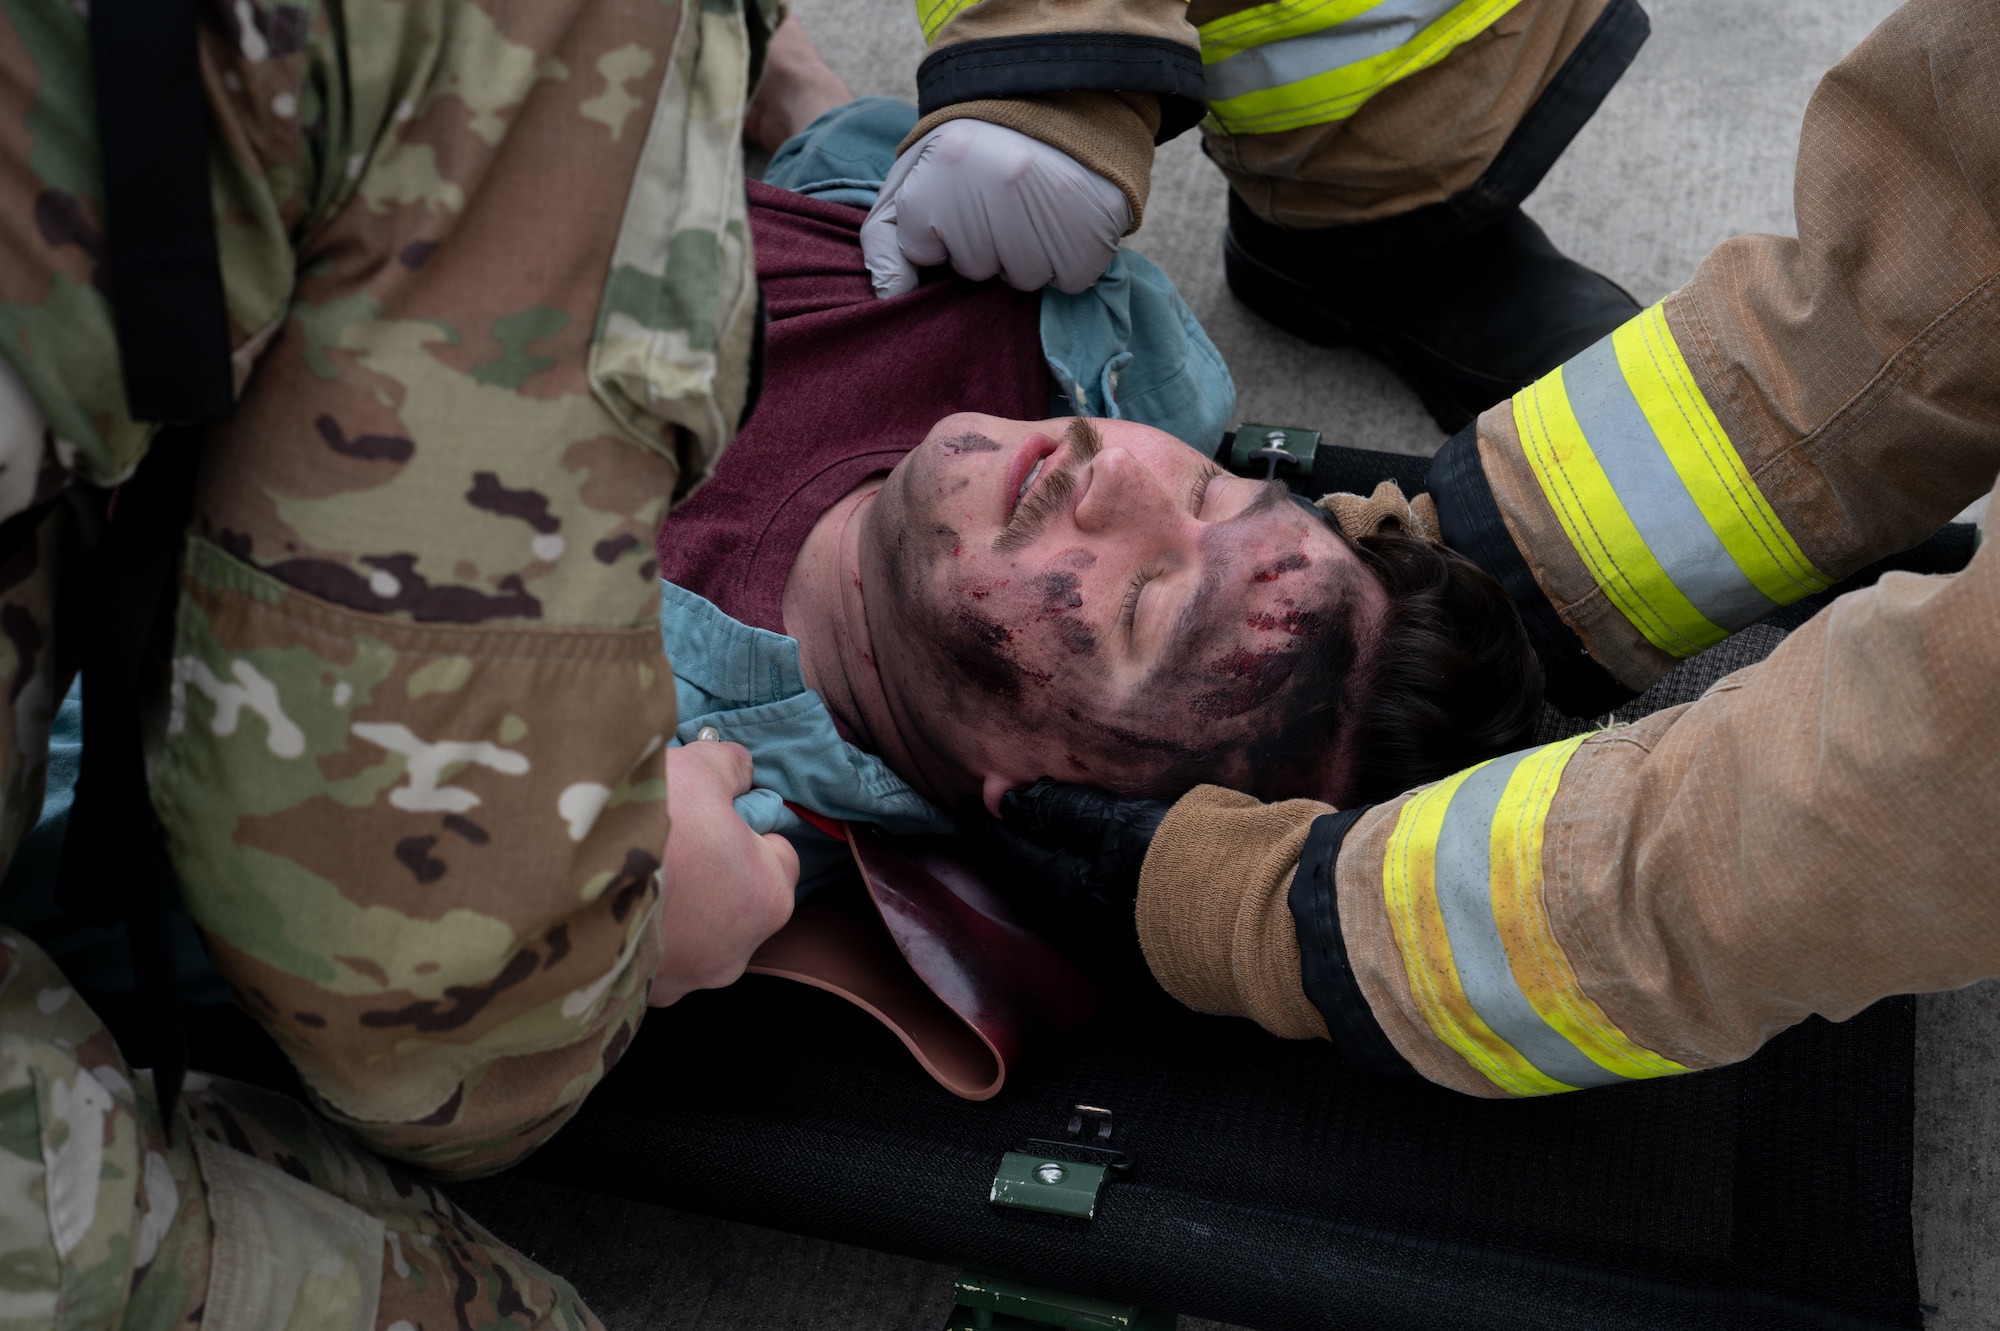 Medical personnel and firefighters attend to a person laying on the ground during an exercise.